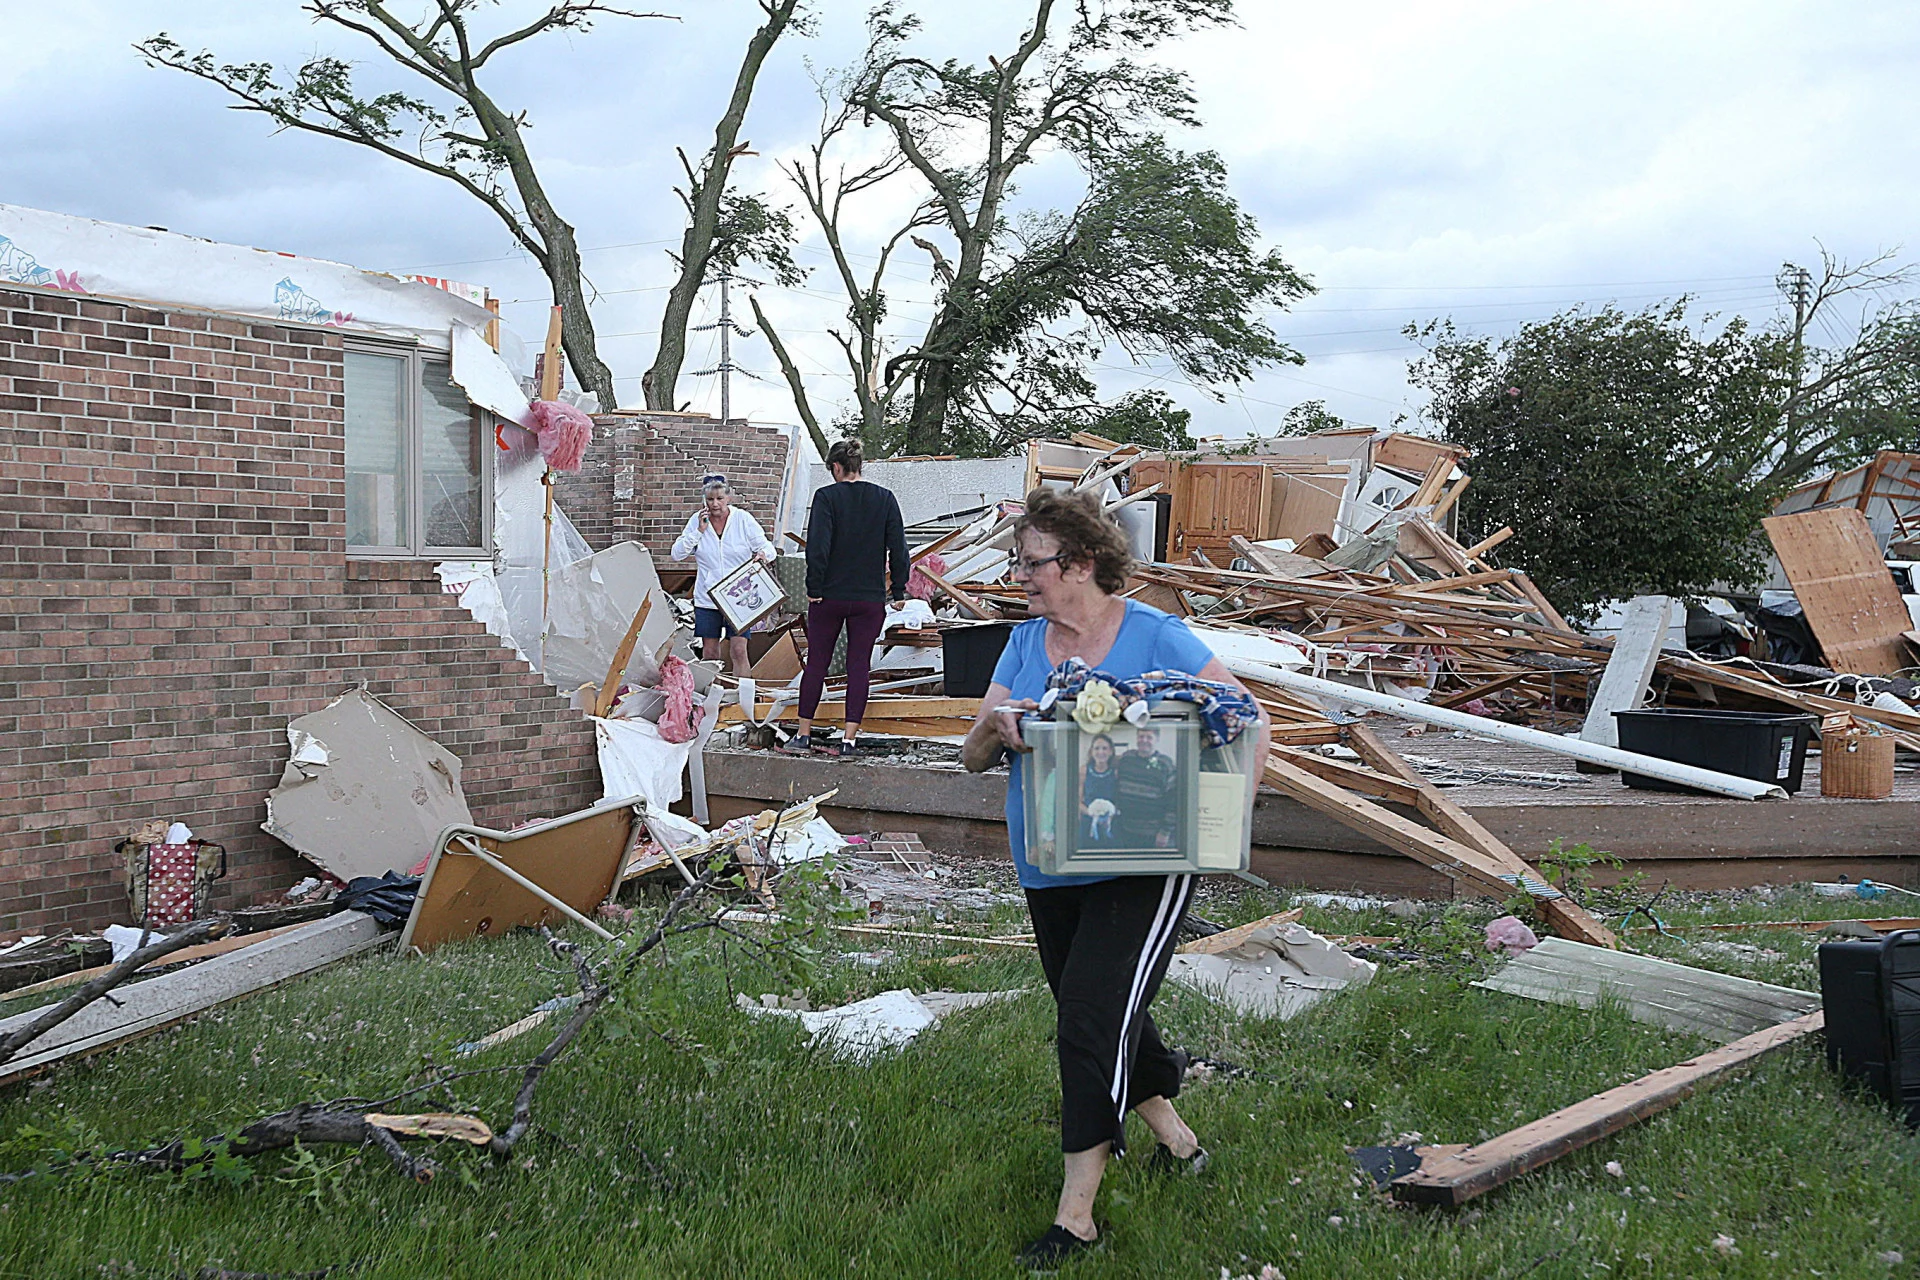 At least one person is dead and a dozen people in Greenfield, Iowa, were injured after a powerful tornado struck the town on Tuesday. The story, here